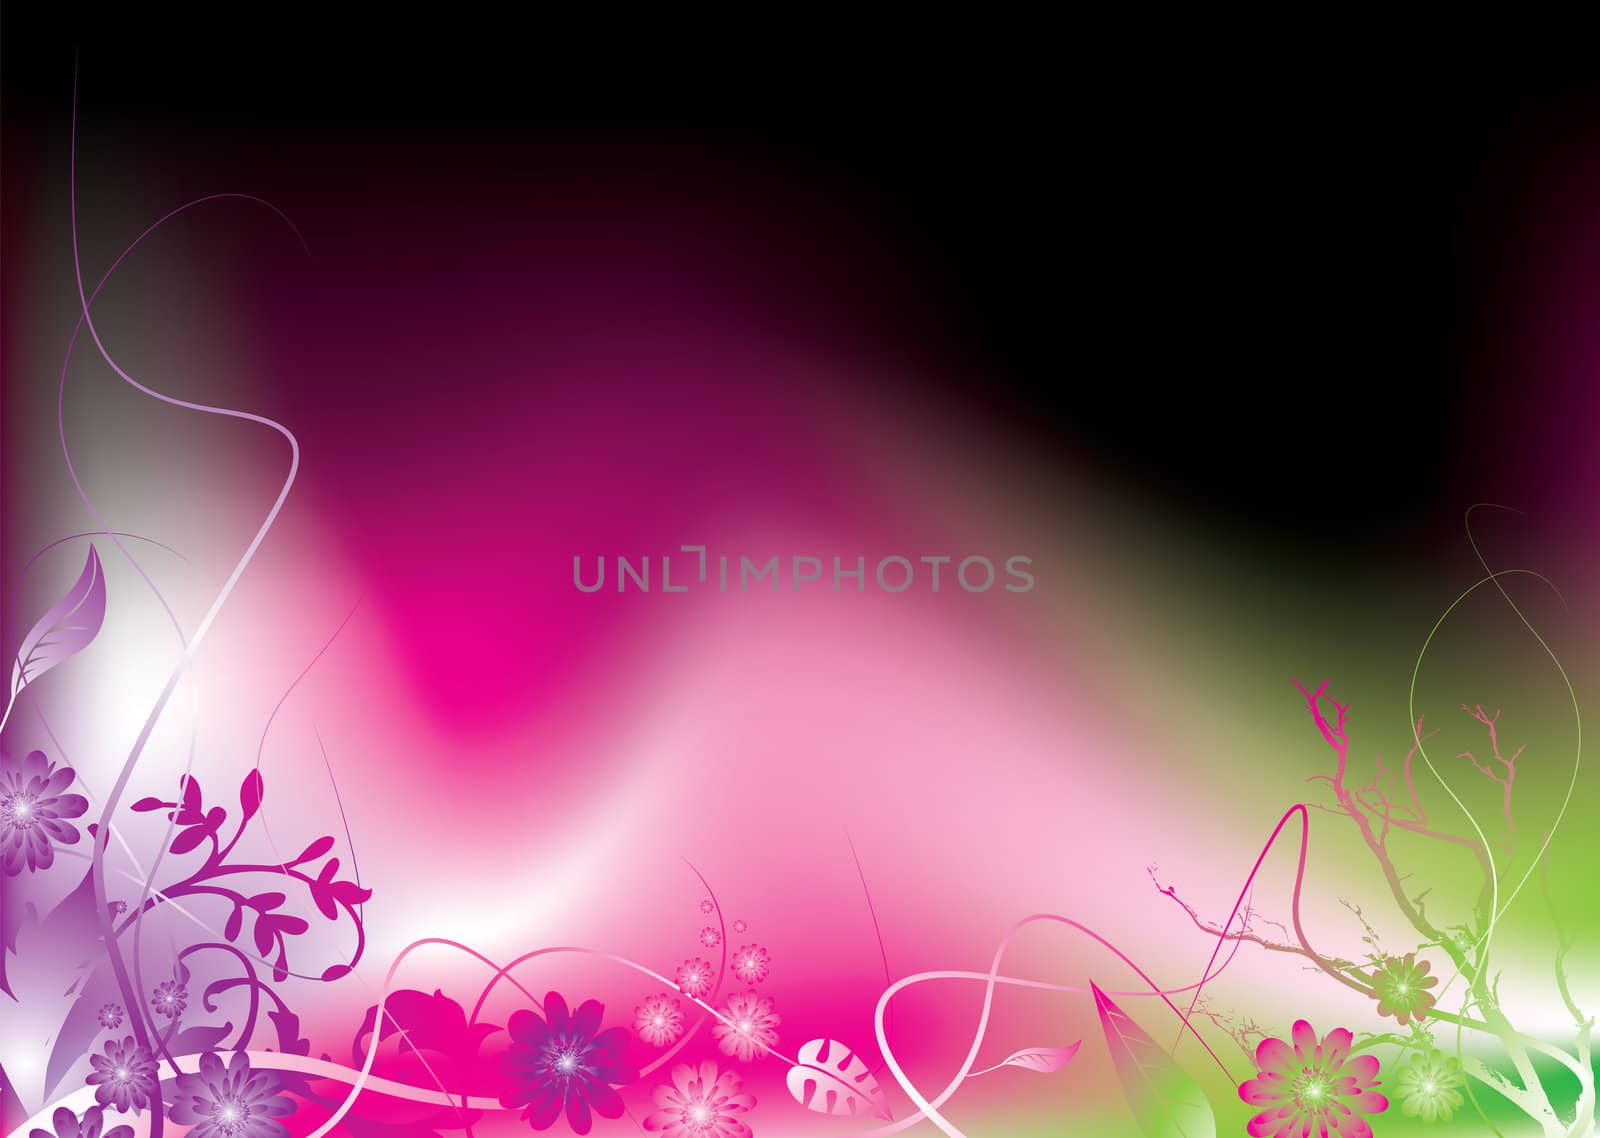 Floral background with bright colours blending into each other